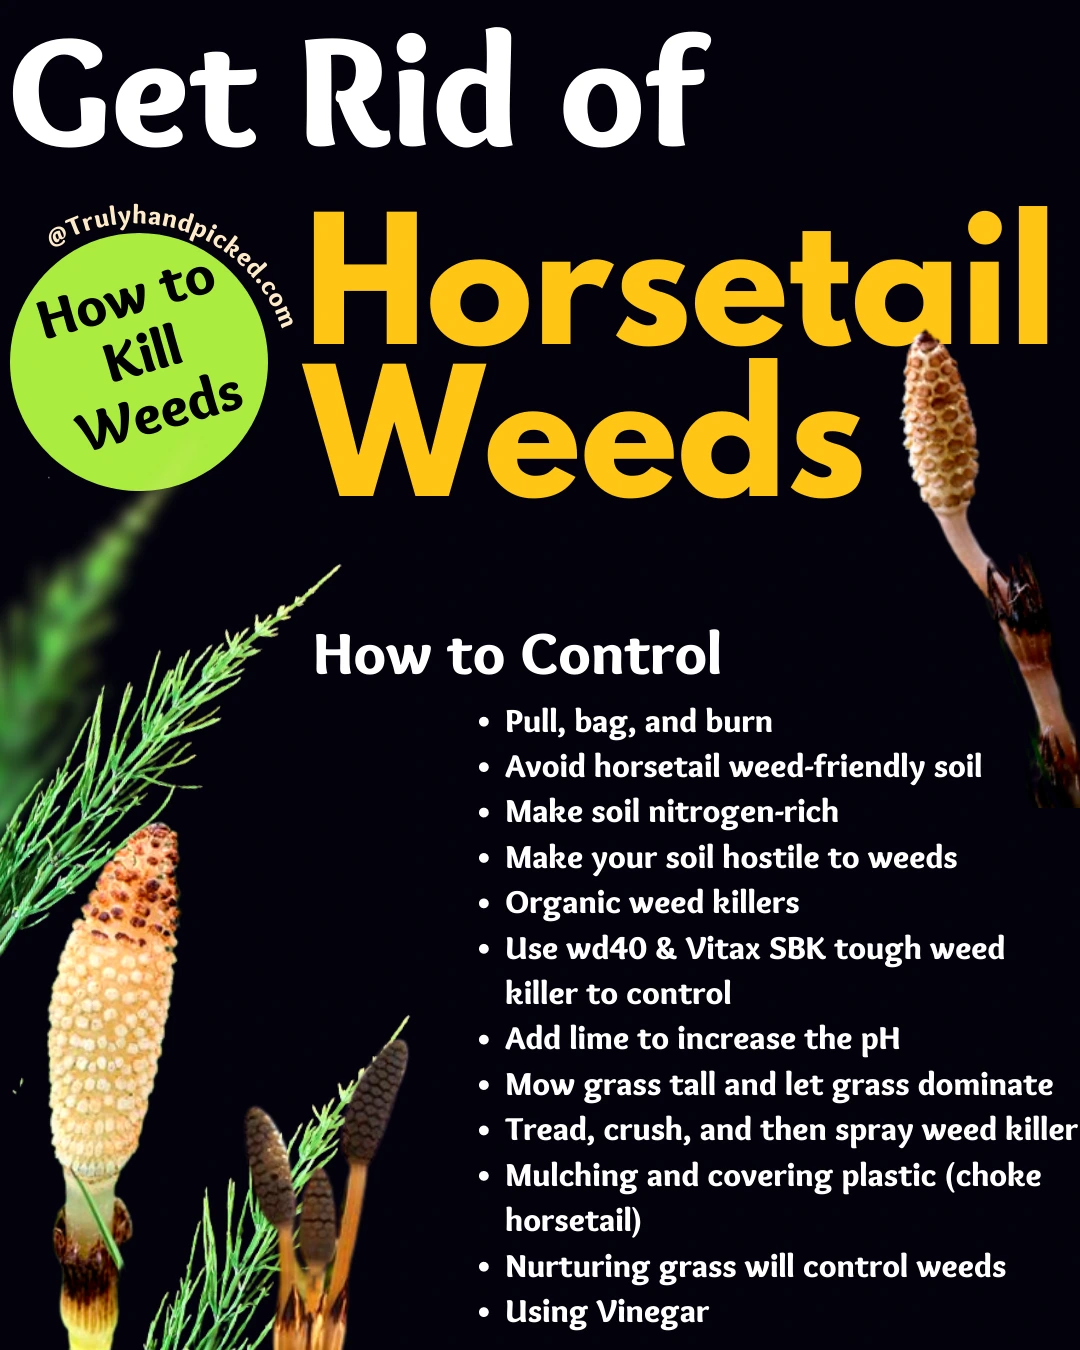 How to get rid of invasive horsetail weeds on lawn quick care tips